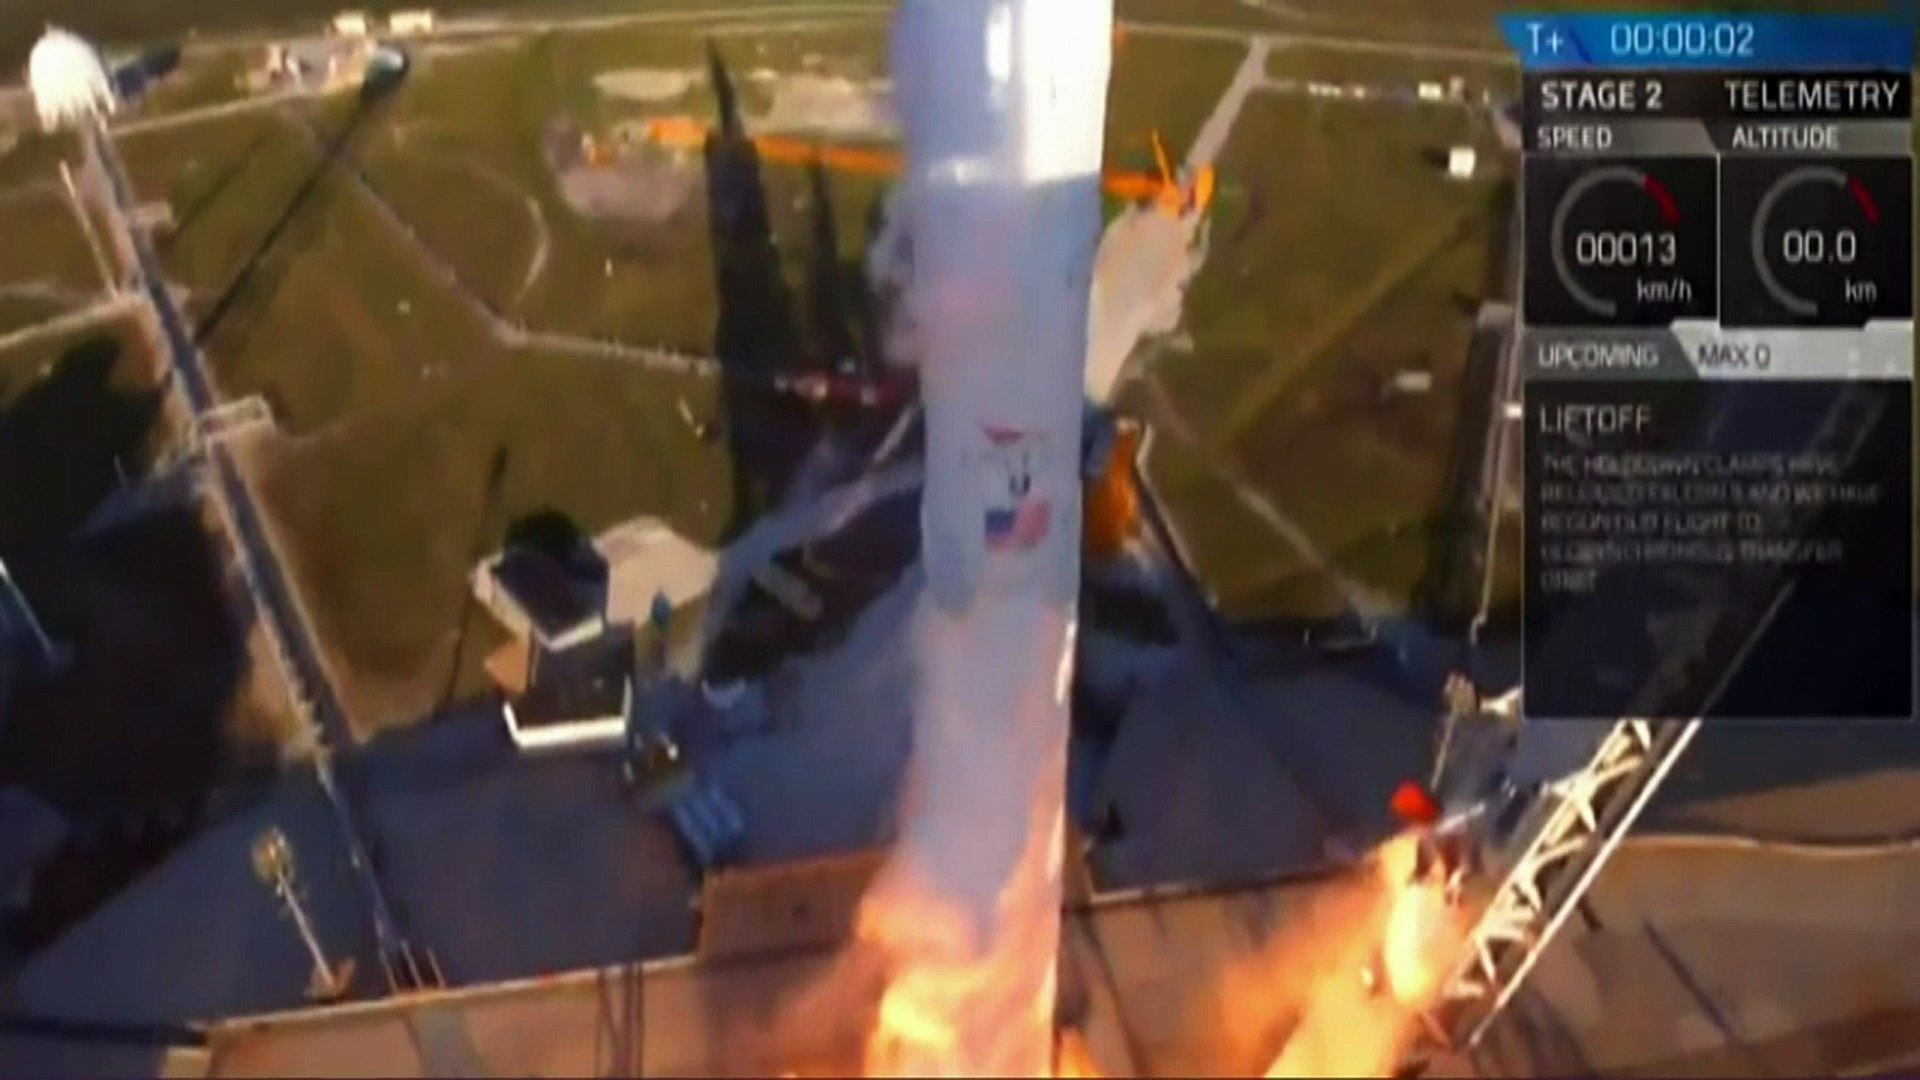 SpaceX has successfully launched a recycled rocket!